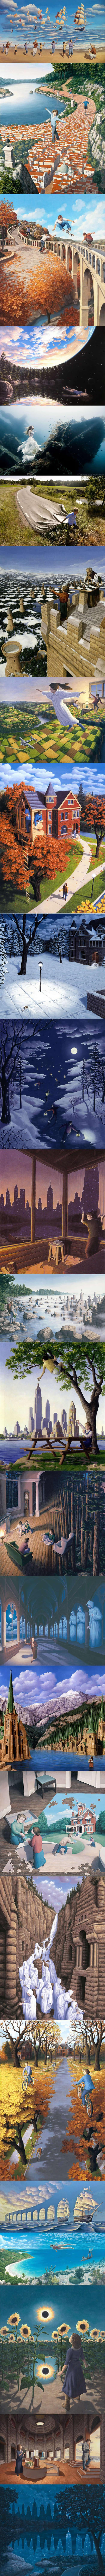 23 mind bending optical illusion paintings by rob gonsalves